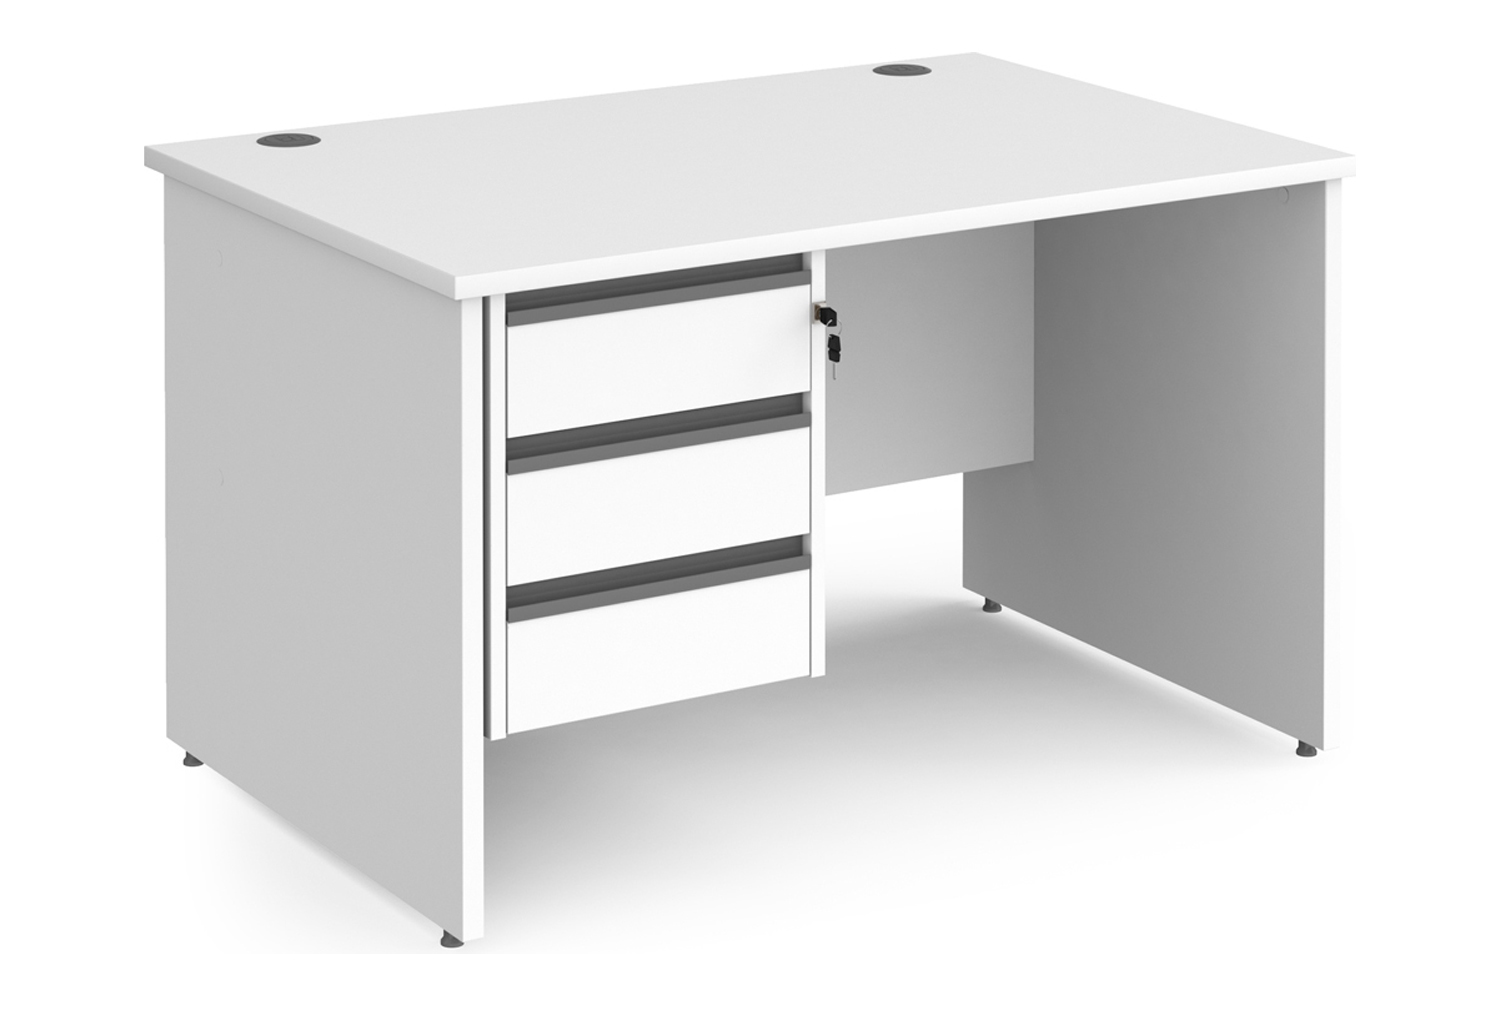 Value Line Classic+ Panel End Office Desk 3 Drawers (Graphite Slats), 120wx80dx73h (cm), White, Express Delivery